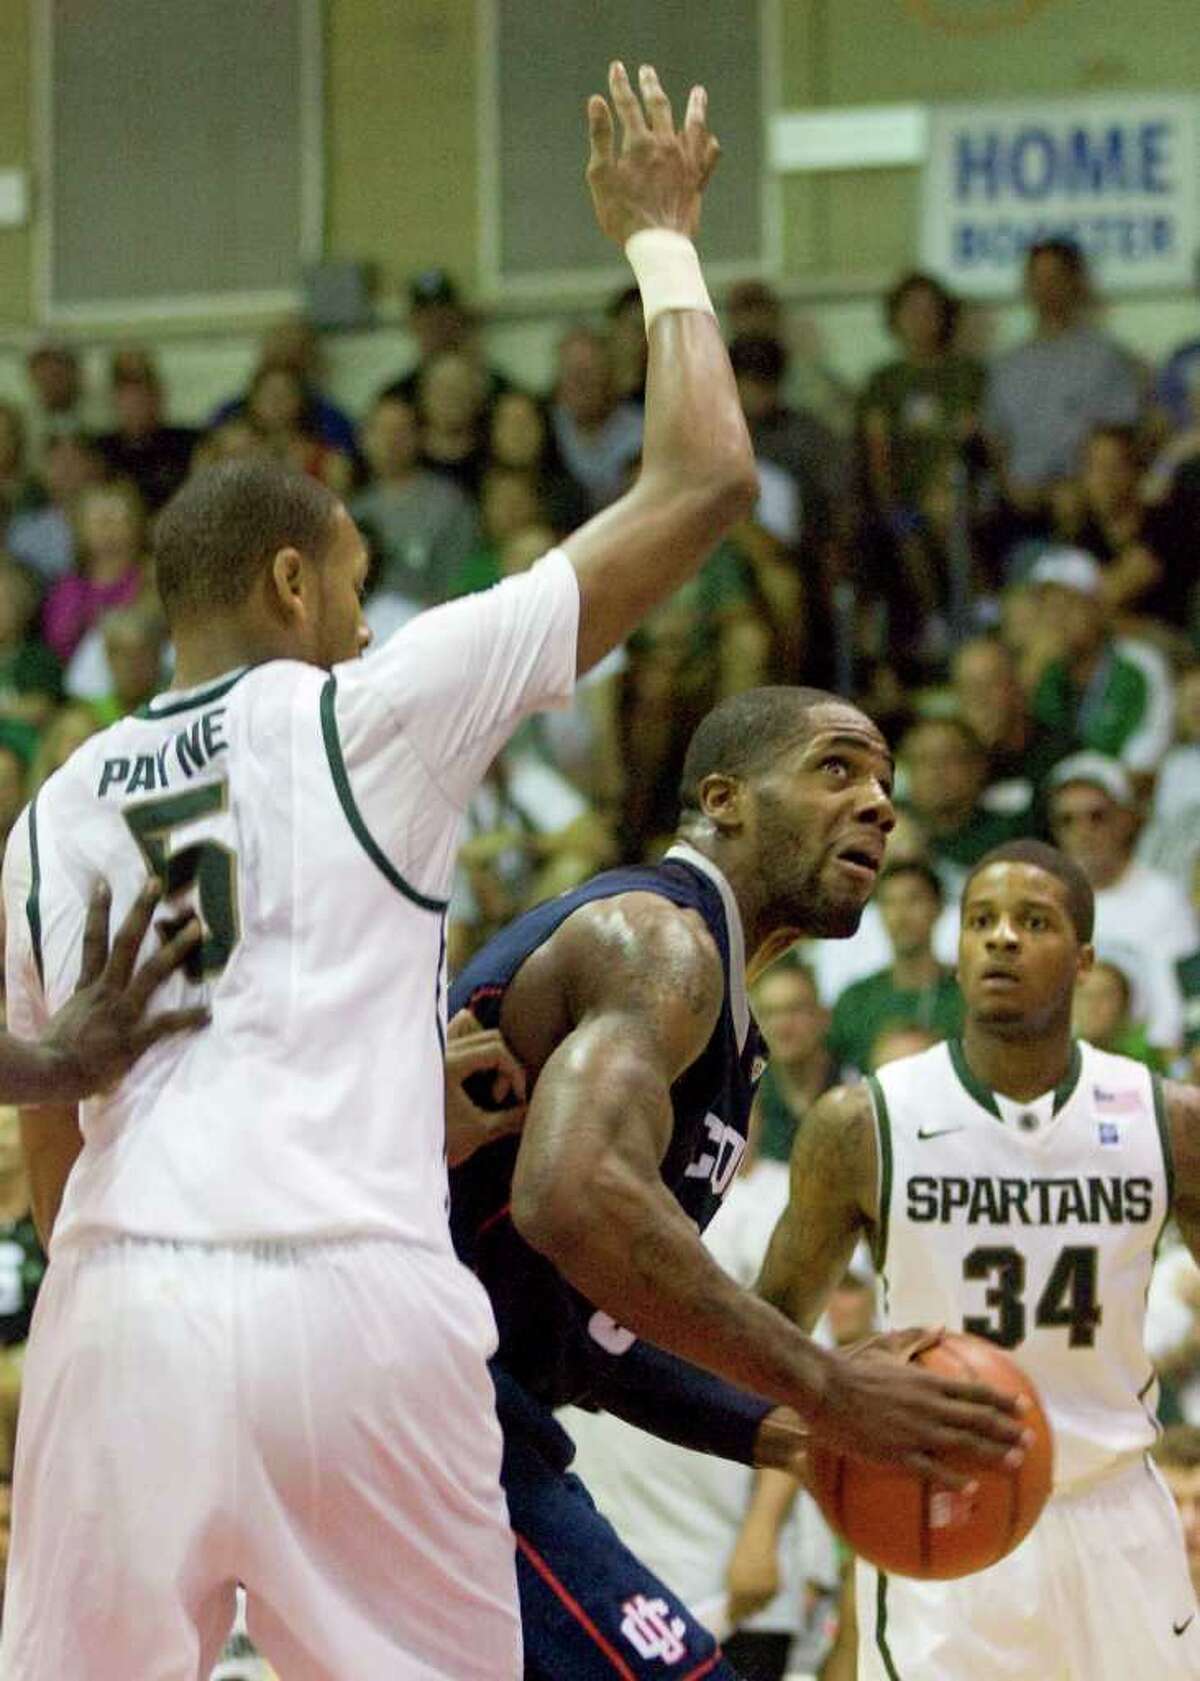 Michigan State center Adreian Payne (5) guards Connecticut's Alex Oriakhi in the first half of a NCAA college basketball game at the Maui Invitational in Lahaina, Hawaii Tuesday, Nov. 23, 2010. (AP Photo/Eugene Tanner)